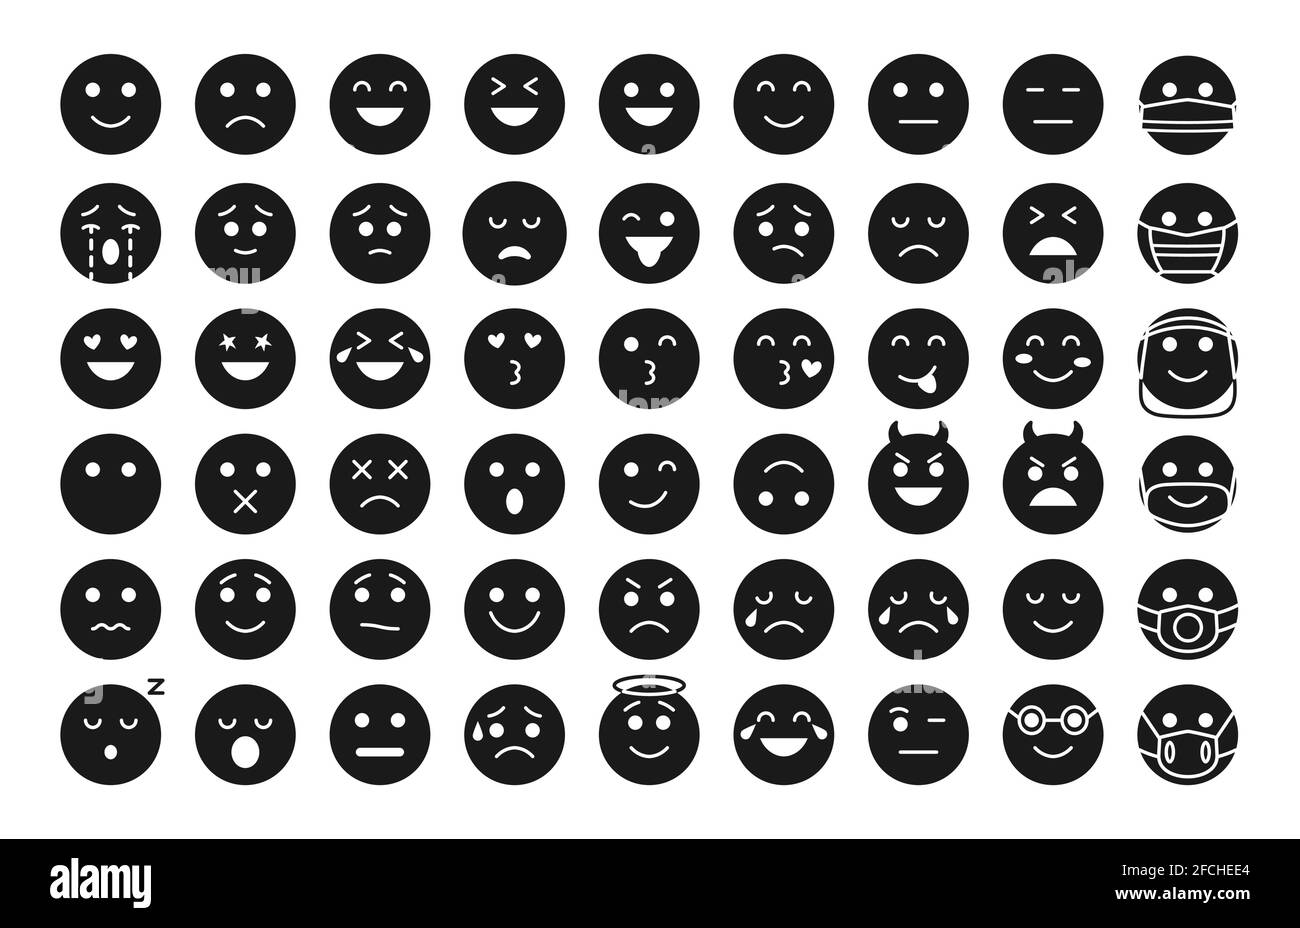 Emoji face black glyph icon set. Different type emoticon smile silhouette collection. Template mood faces expressing laugh, sad or angry, love. Emoticons in mask Isolated on white vector illustration Stock Vector